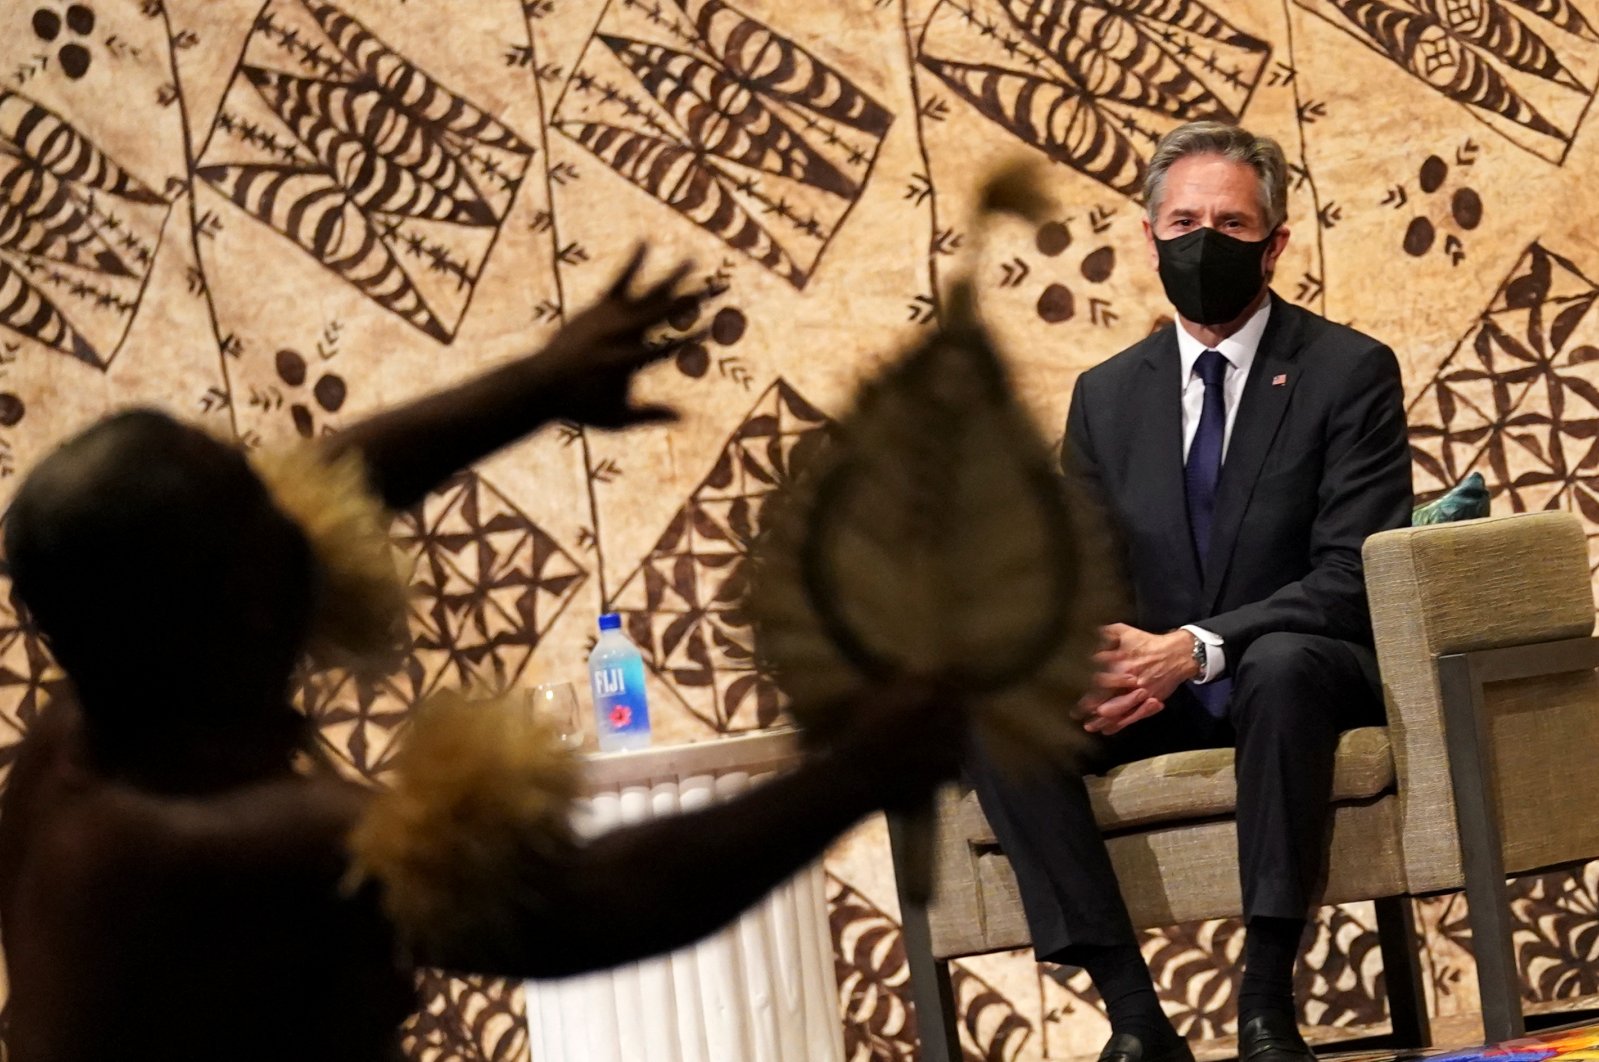 U.S. Secretary of State Antony Blinken watches a cultural farewell ceremony during his visit to Nadi, Fiji, Feb.12, 2022. (Reuters Photo)